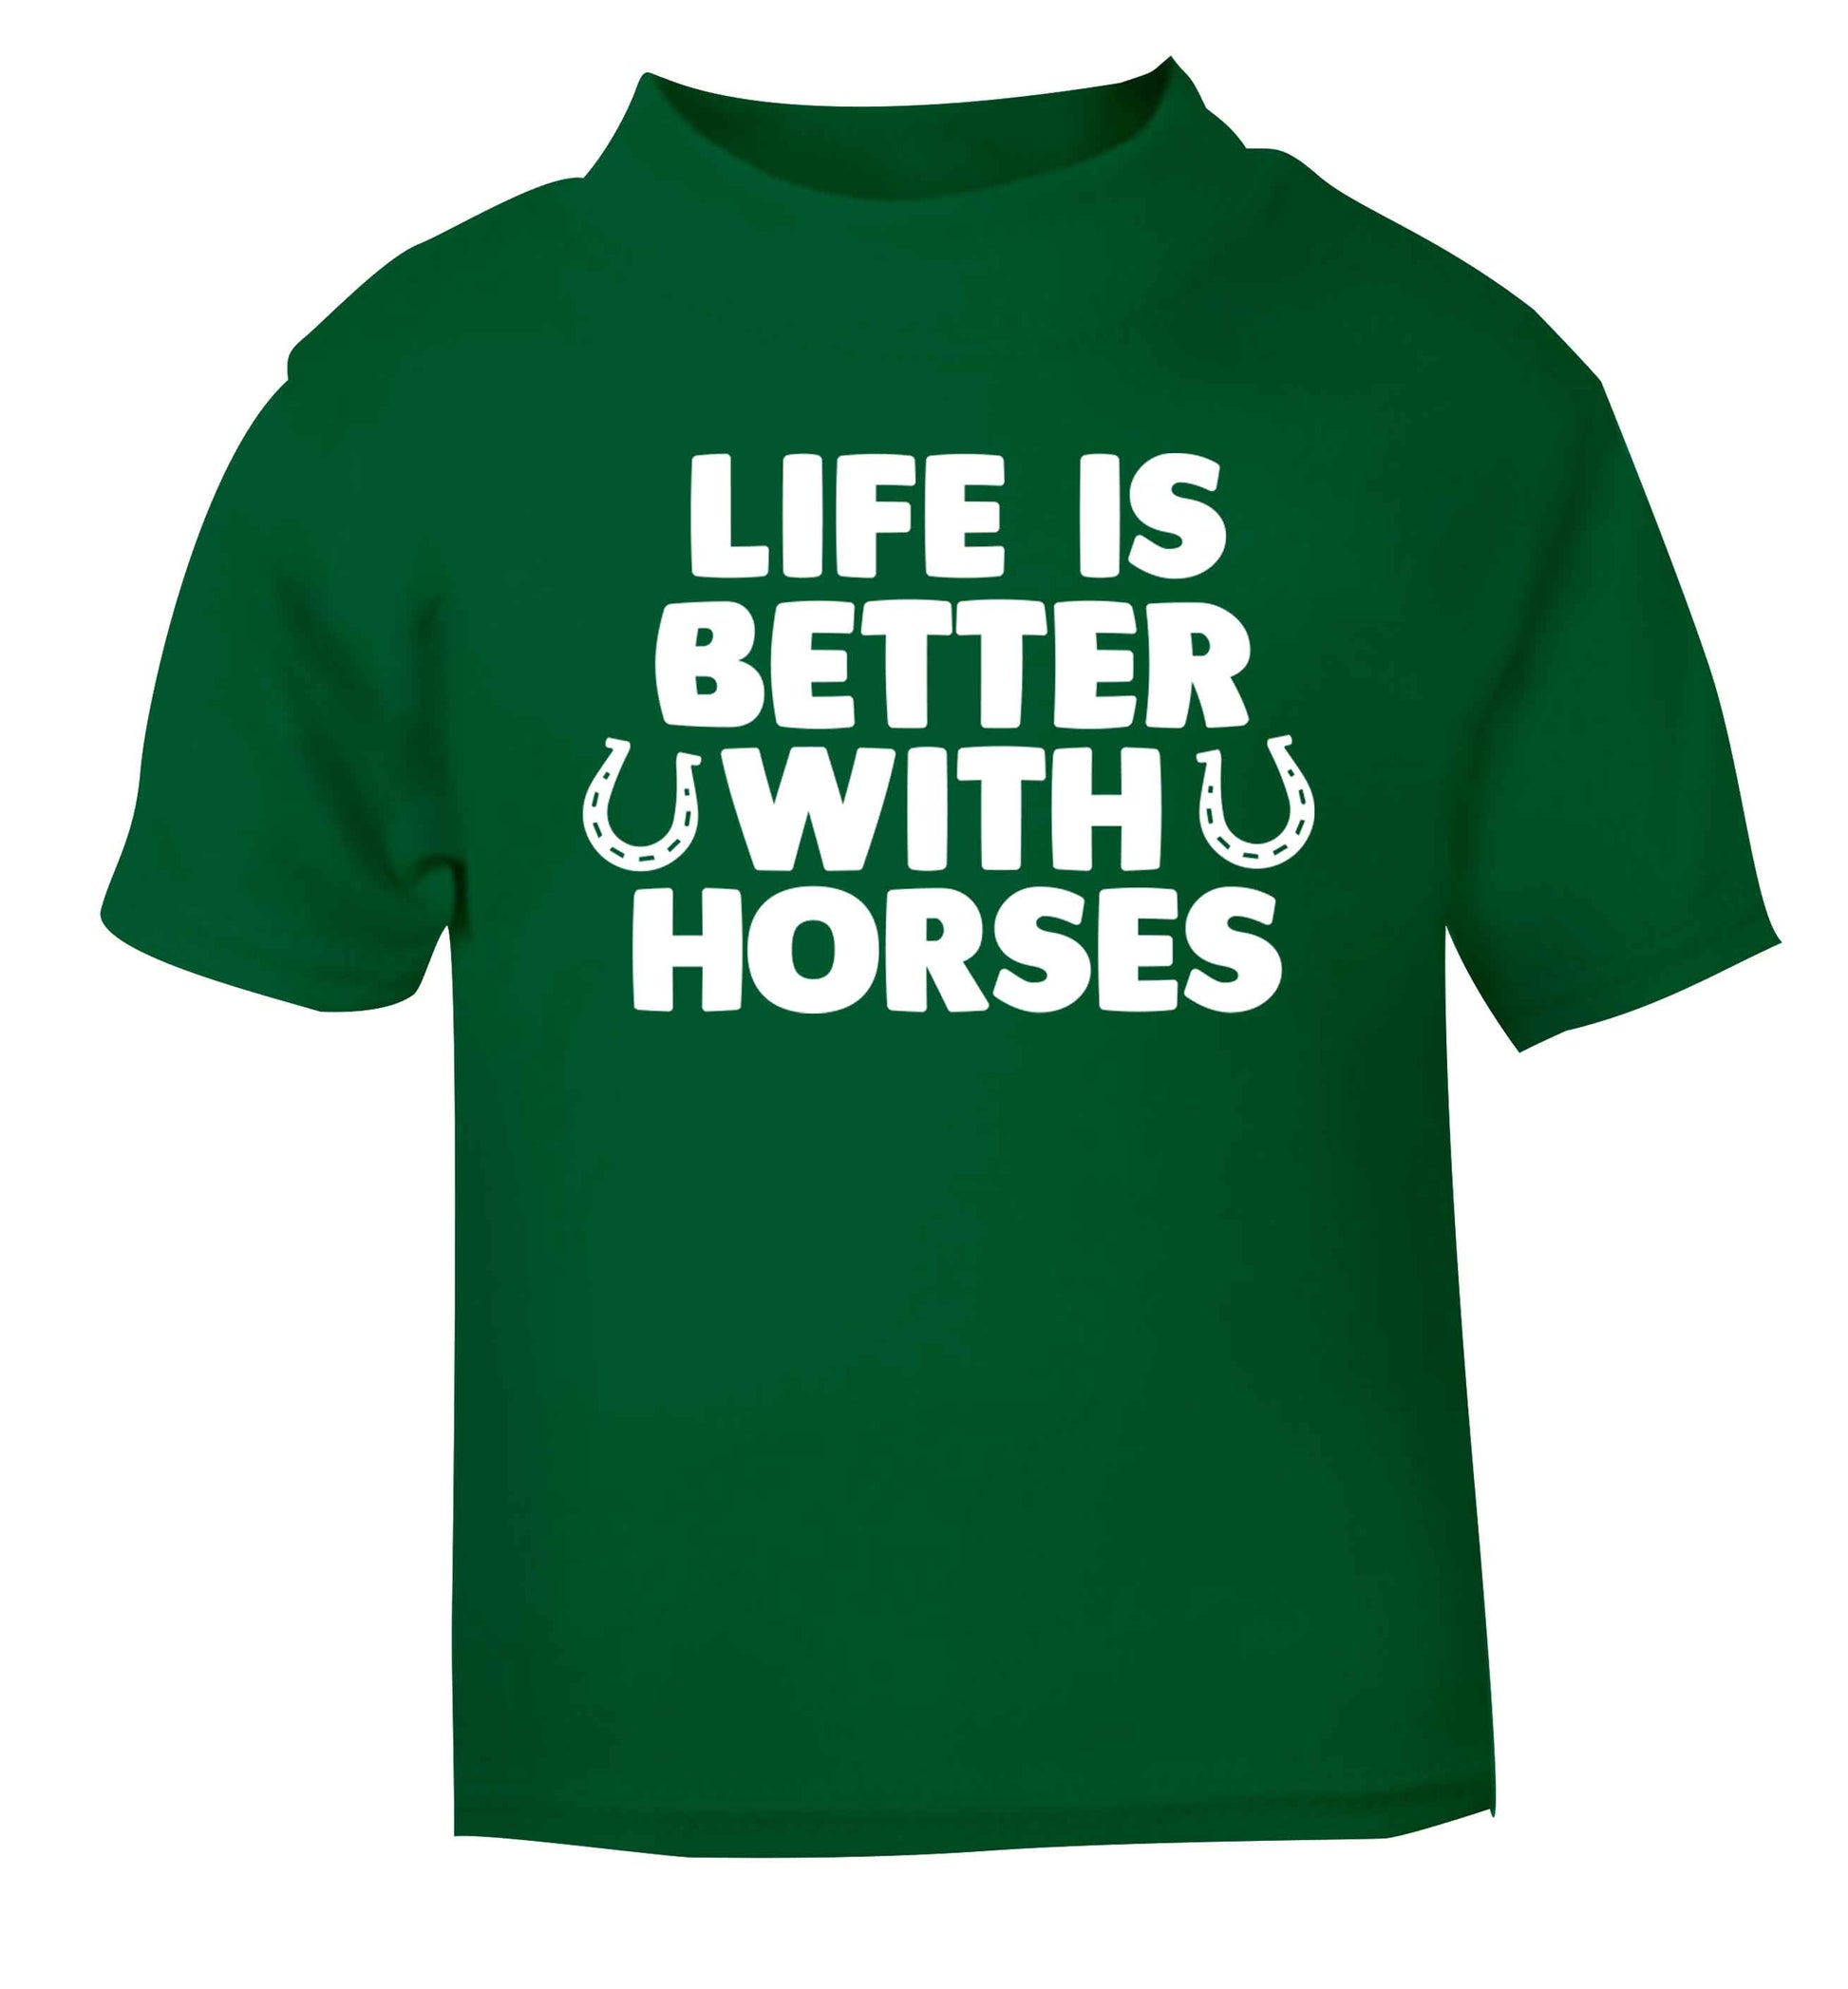 Life is better with horses green baby toddler Tshirt 2 Years